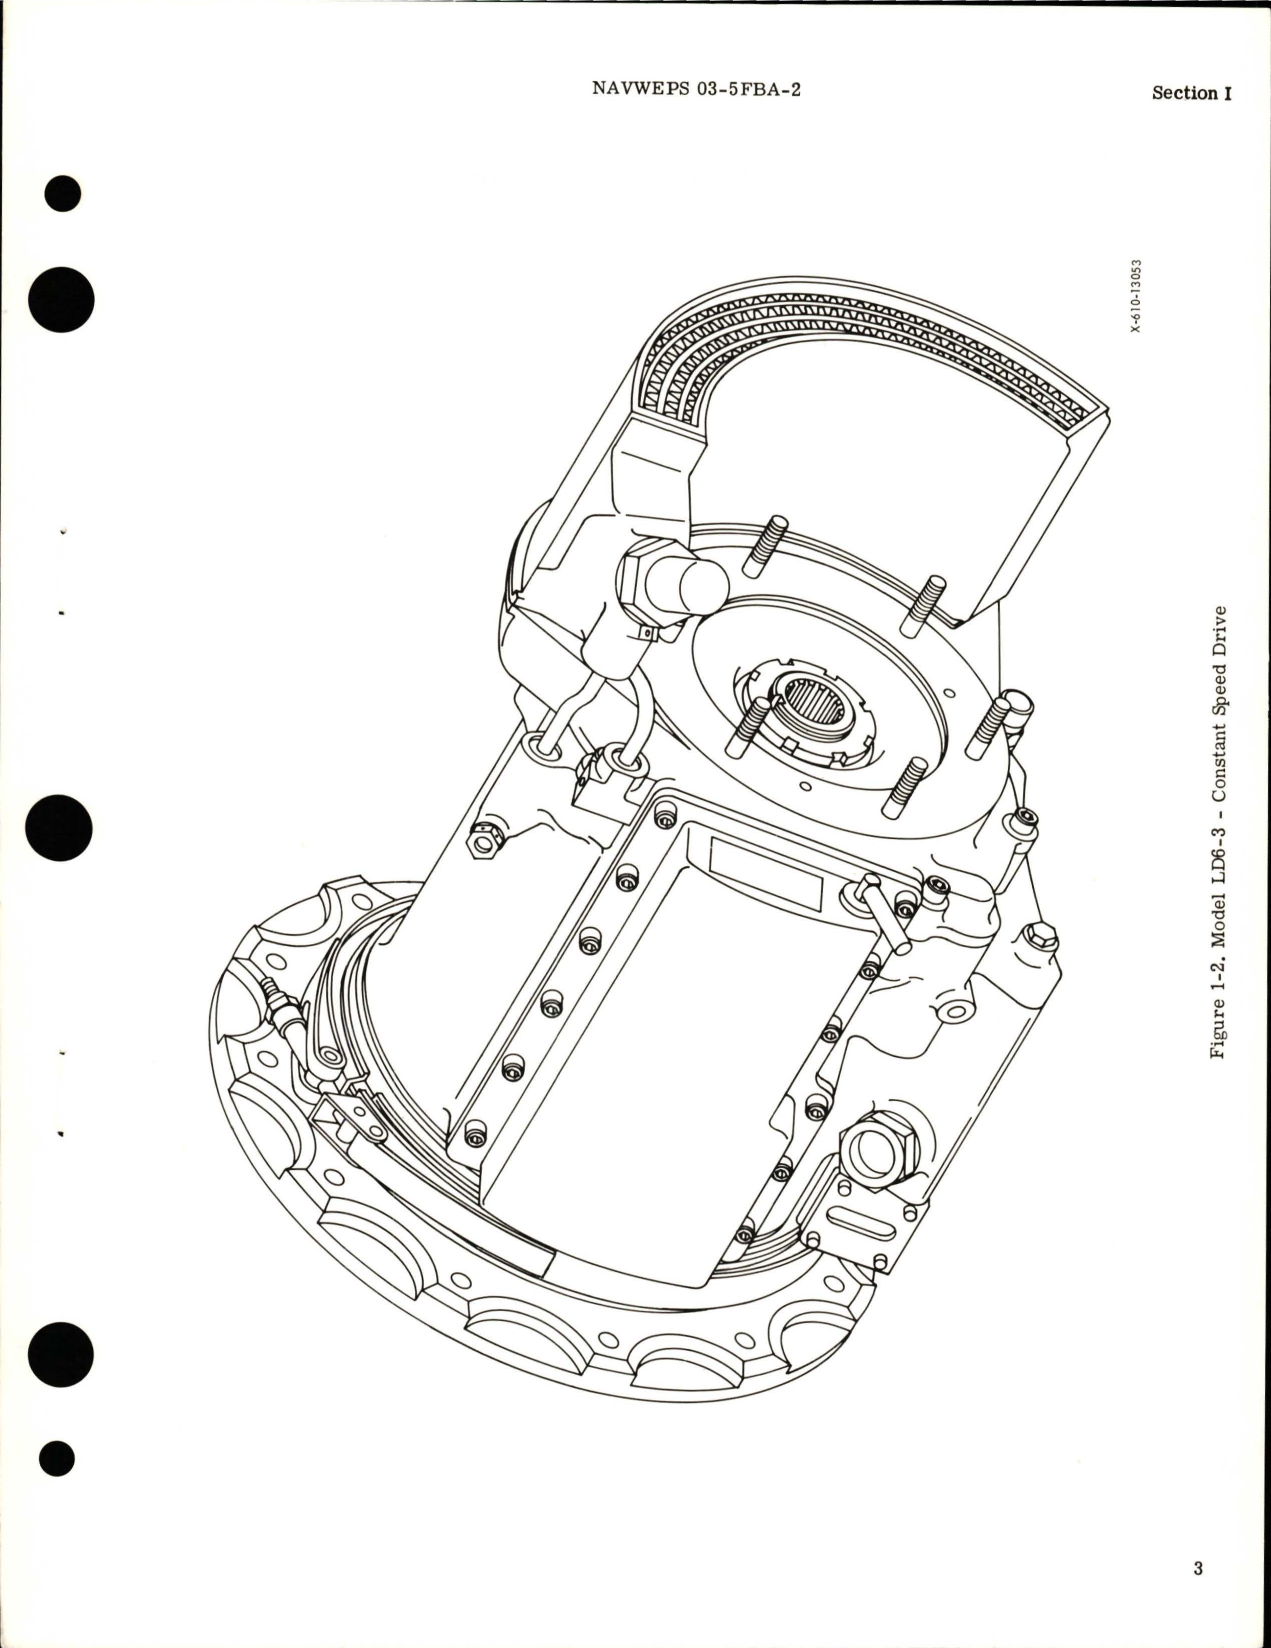 Sample page 9 from AirCorps Library document: Overhaul Instructions for Constant Speed Drive - Models LD6-3, LD6-9, and LD6-10 - Parts 209500, 209700, and 209755 